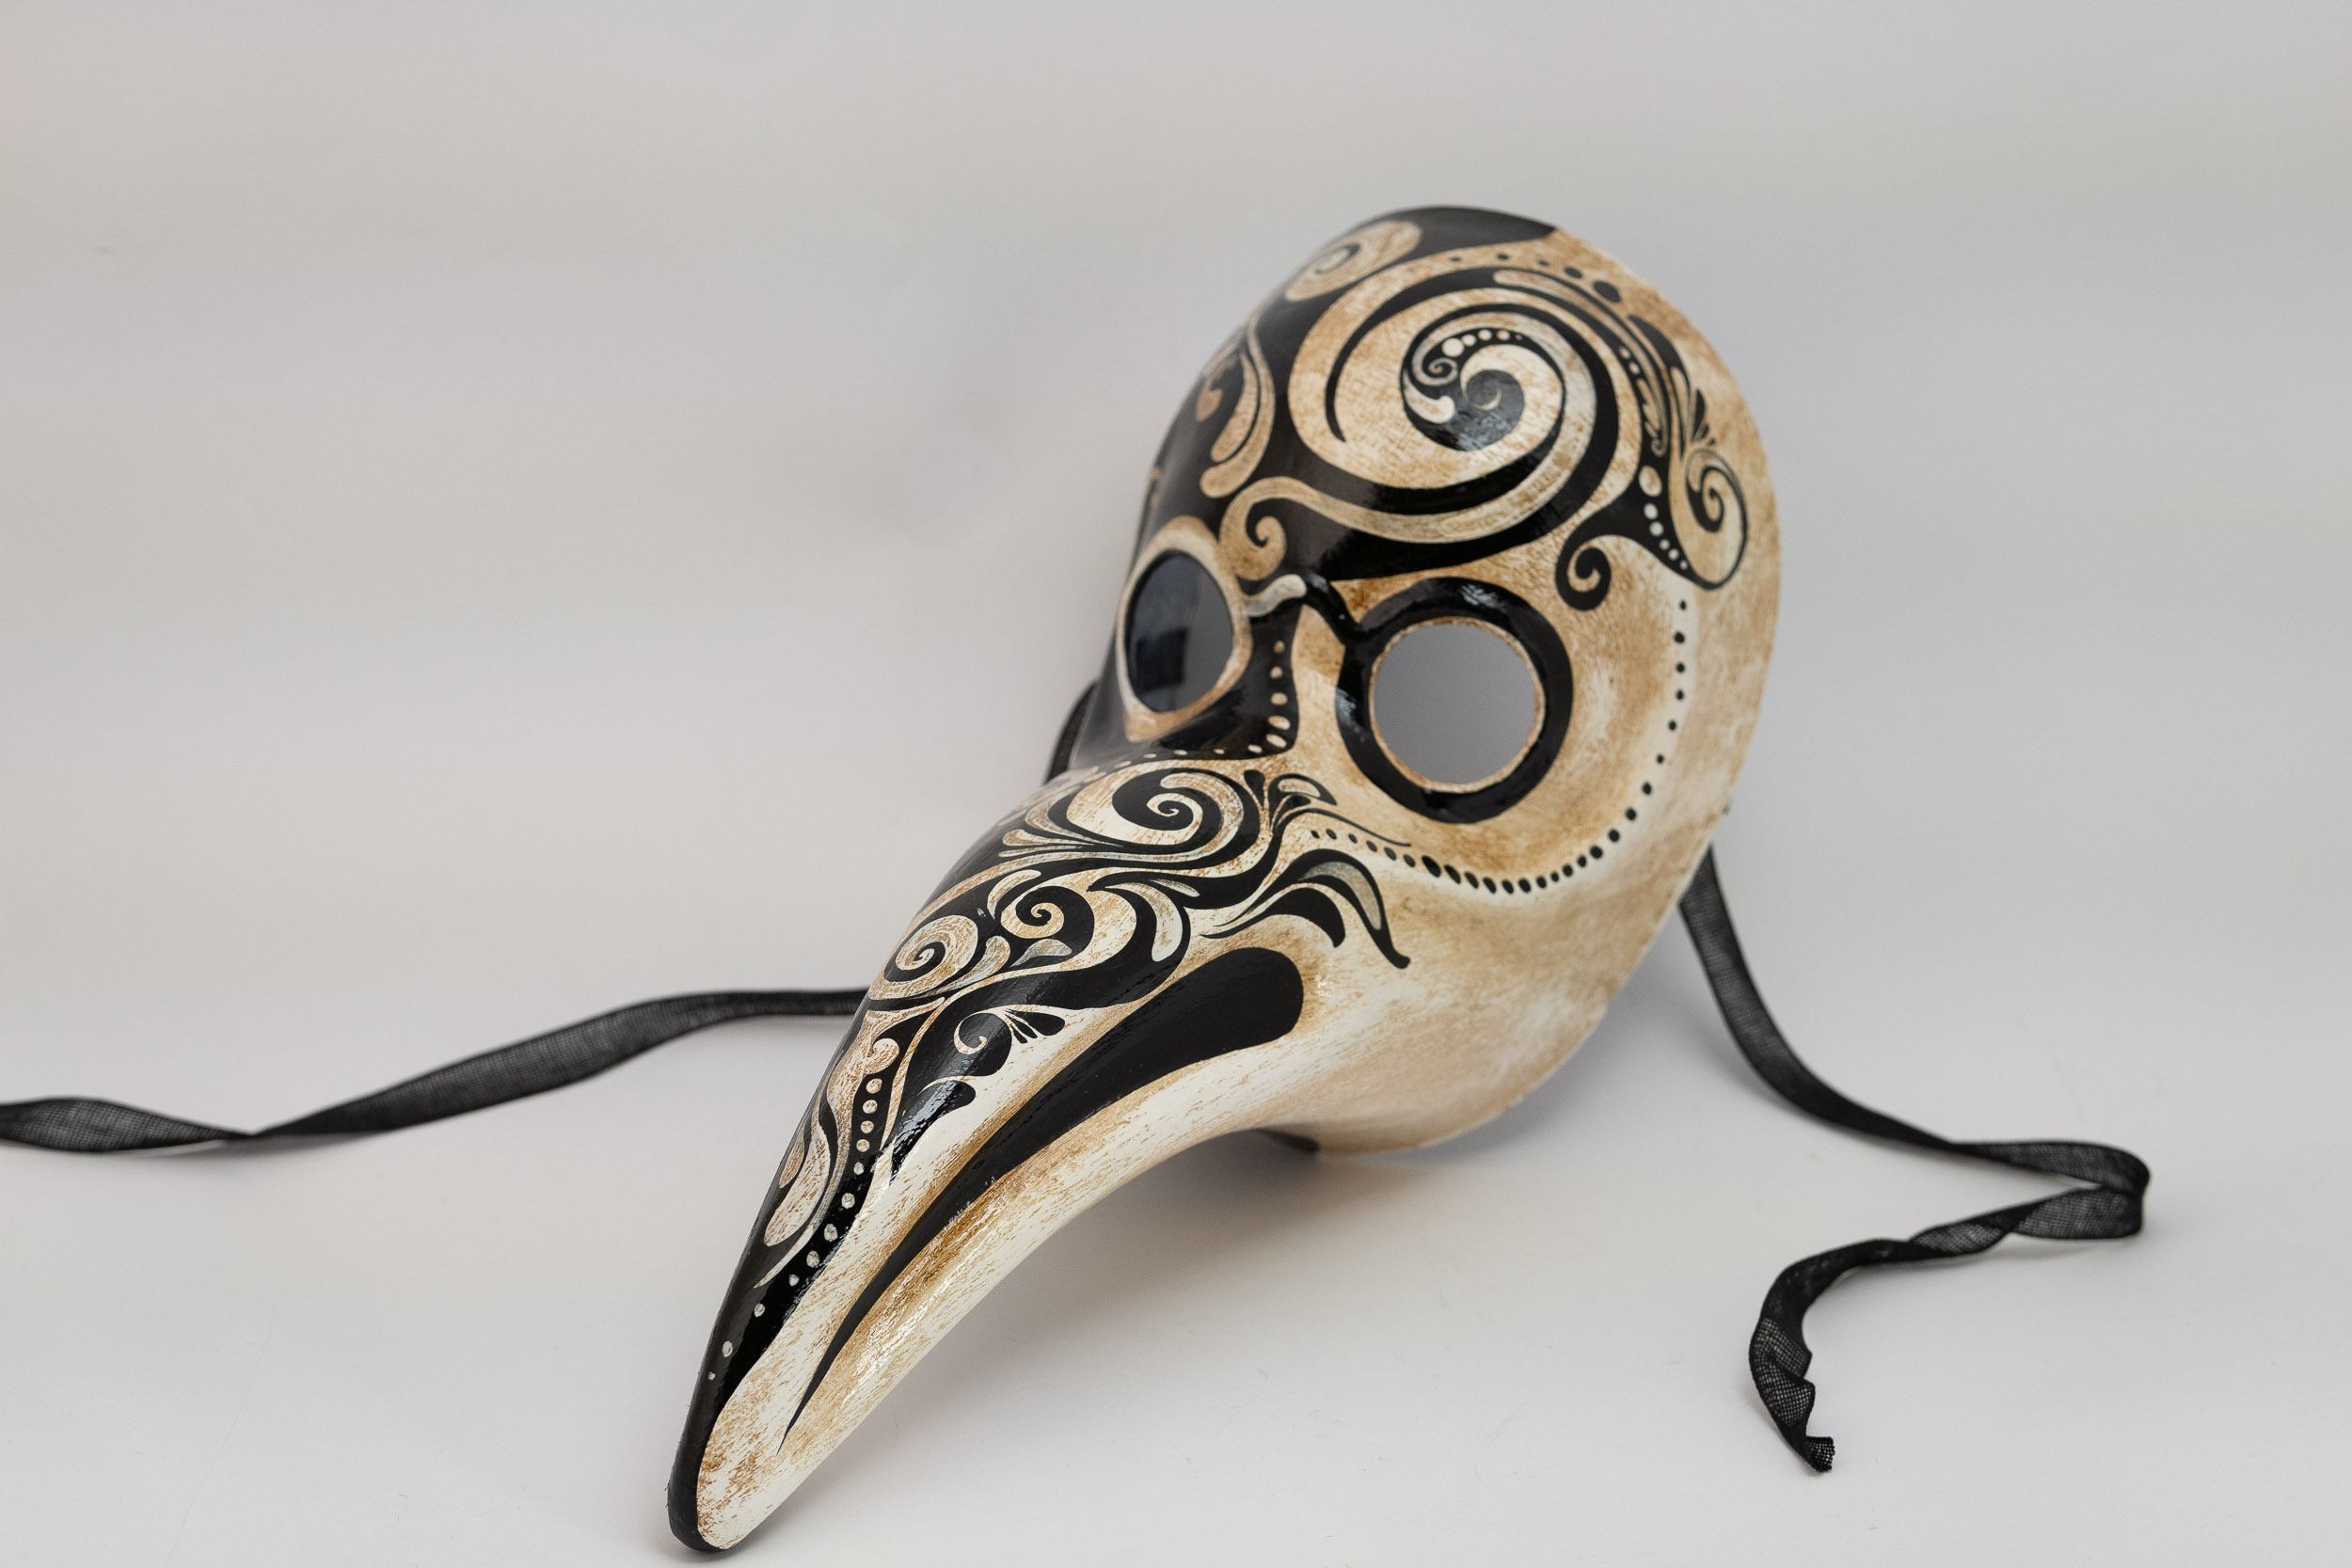 Frivillig forvirring Creed Plague Doctor Mask - "Fede Venezia" Collection